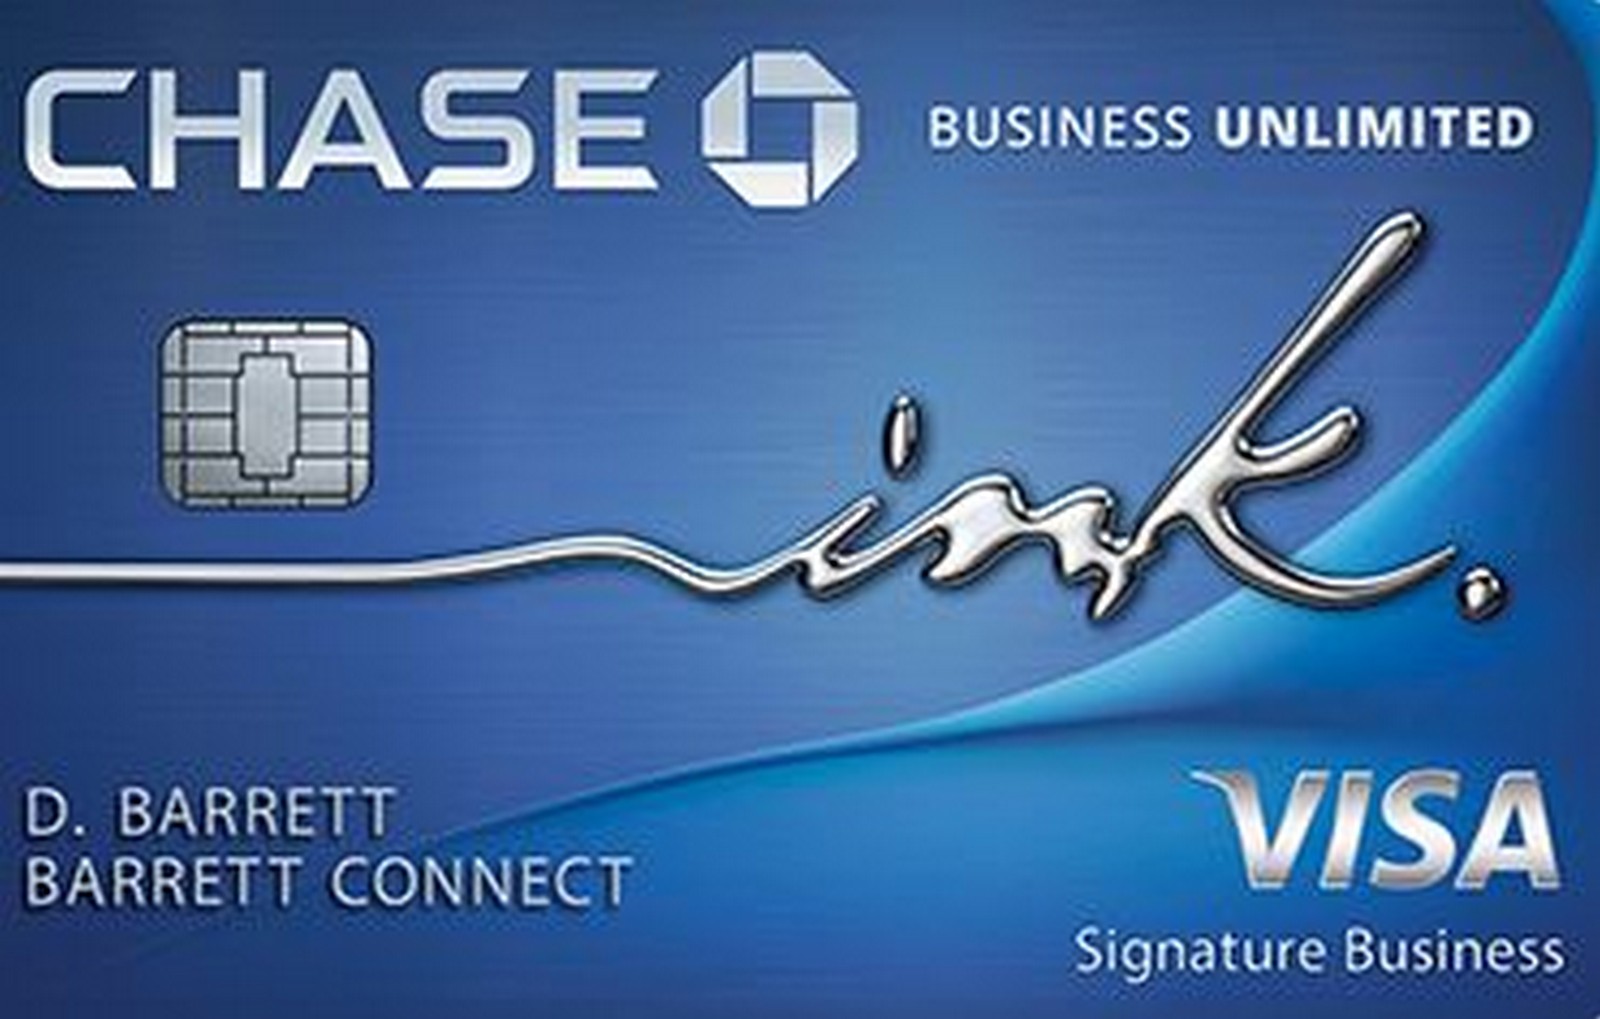 Chase Ink Business Unlimited Balance Transfer